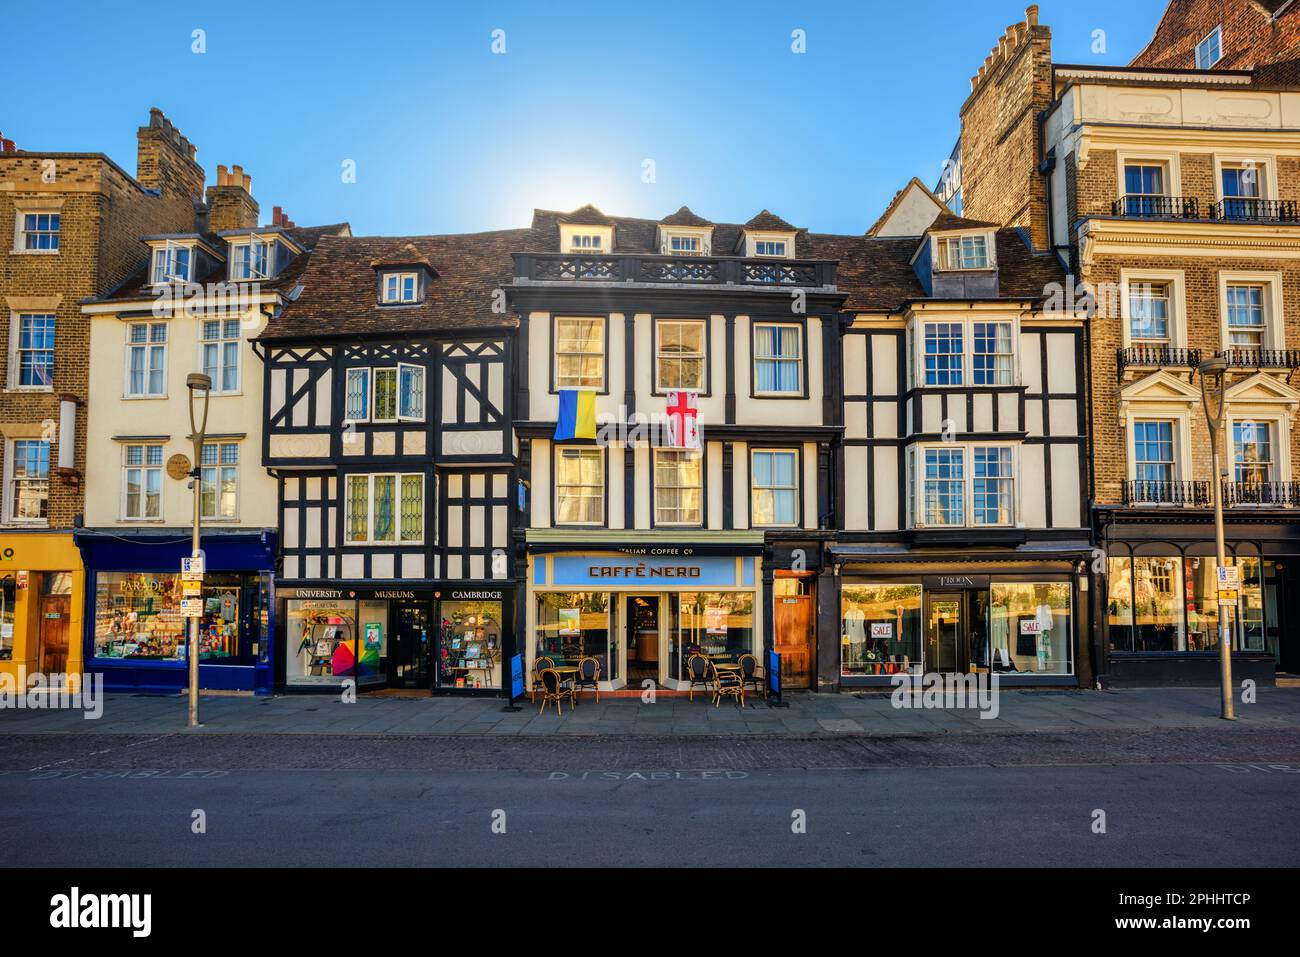 Cambridge, England - 16 July 2022: Picturesque historic houses in the city center of Cambridge, England. Cambridge is a medieval town and a popular tr Stock Photo